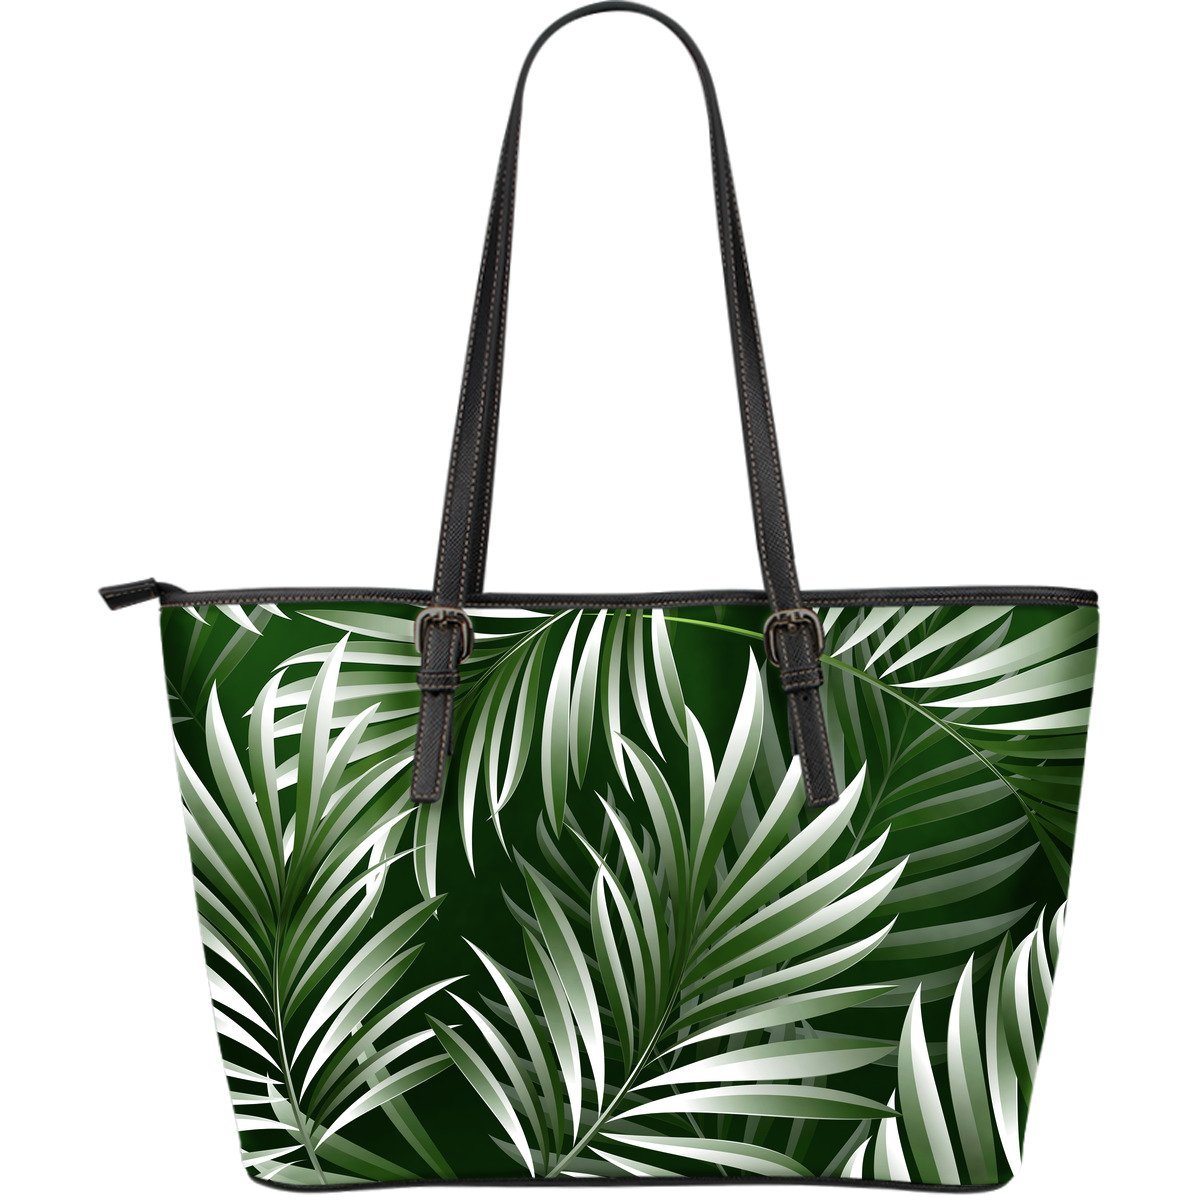 White & Green Tropical Palm Leaves Large Leather Tote Bag